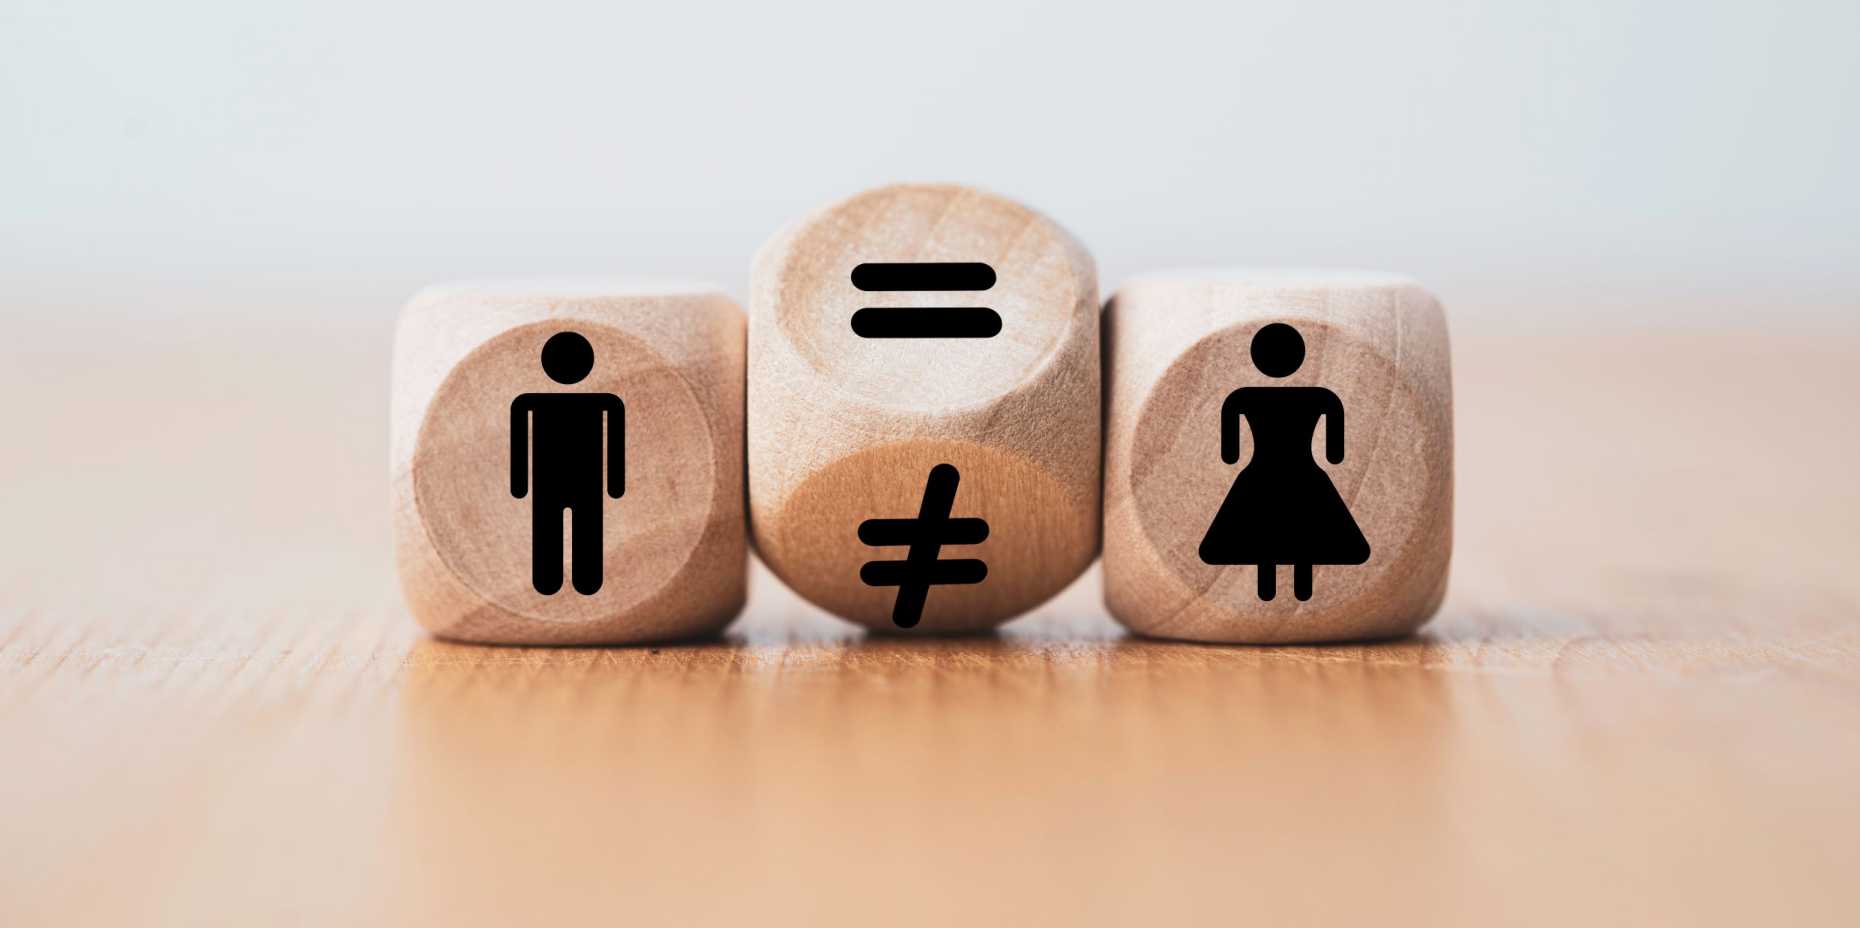 Three dice showing, from left to right, a man, an equal sign and a woman.